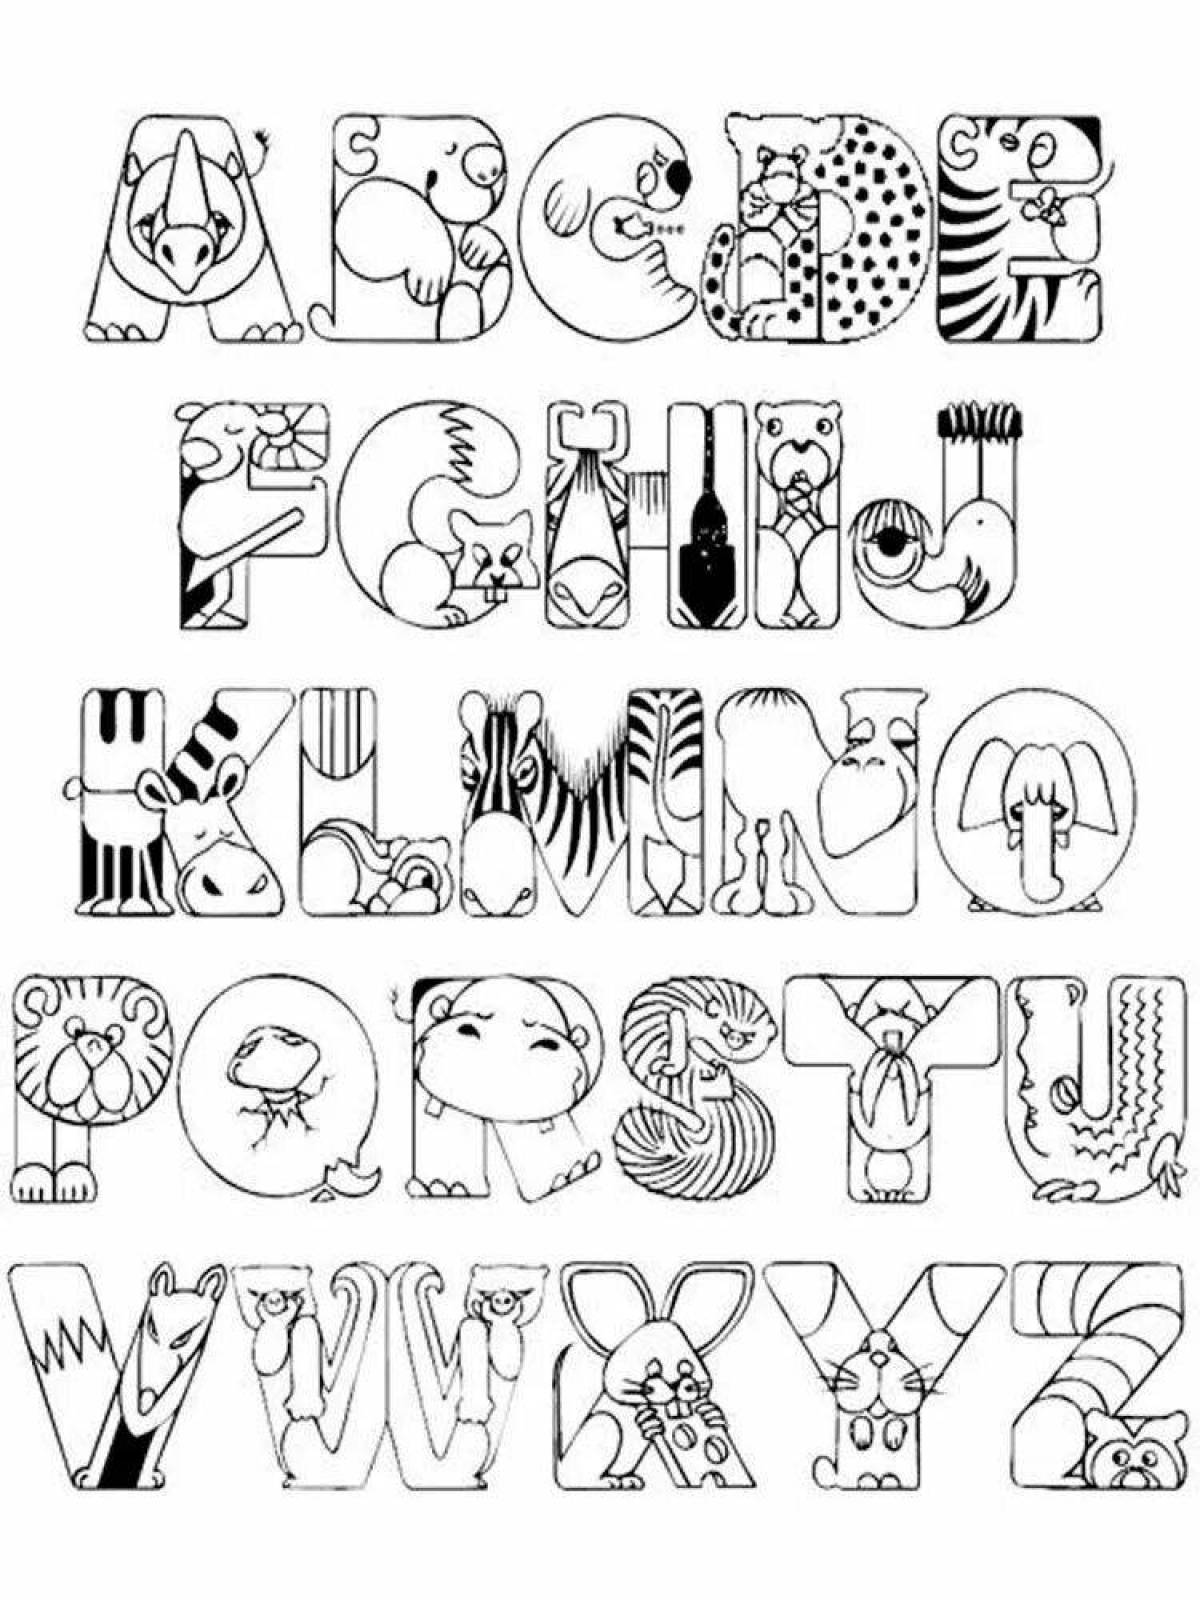 Live coloring with the English alphabet